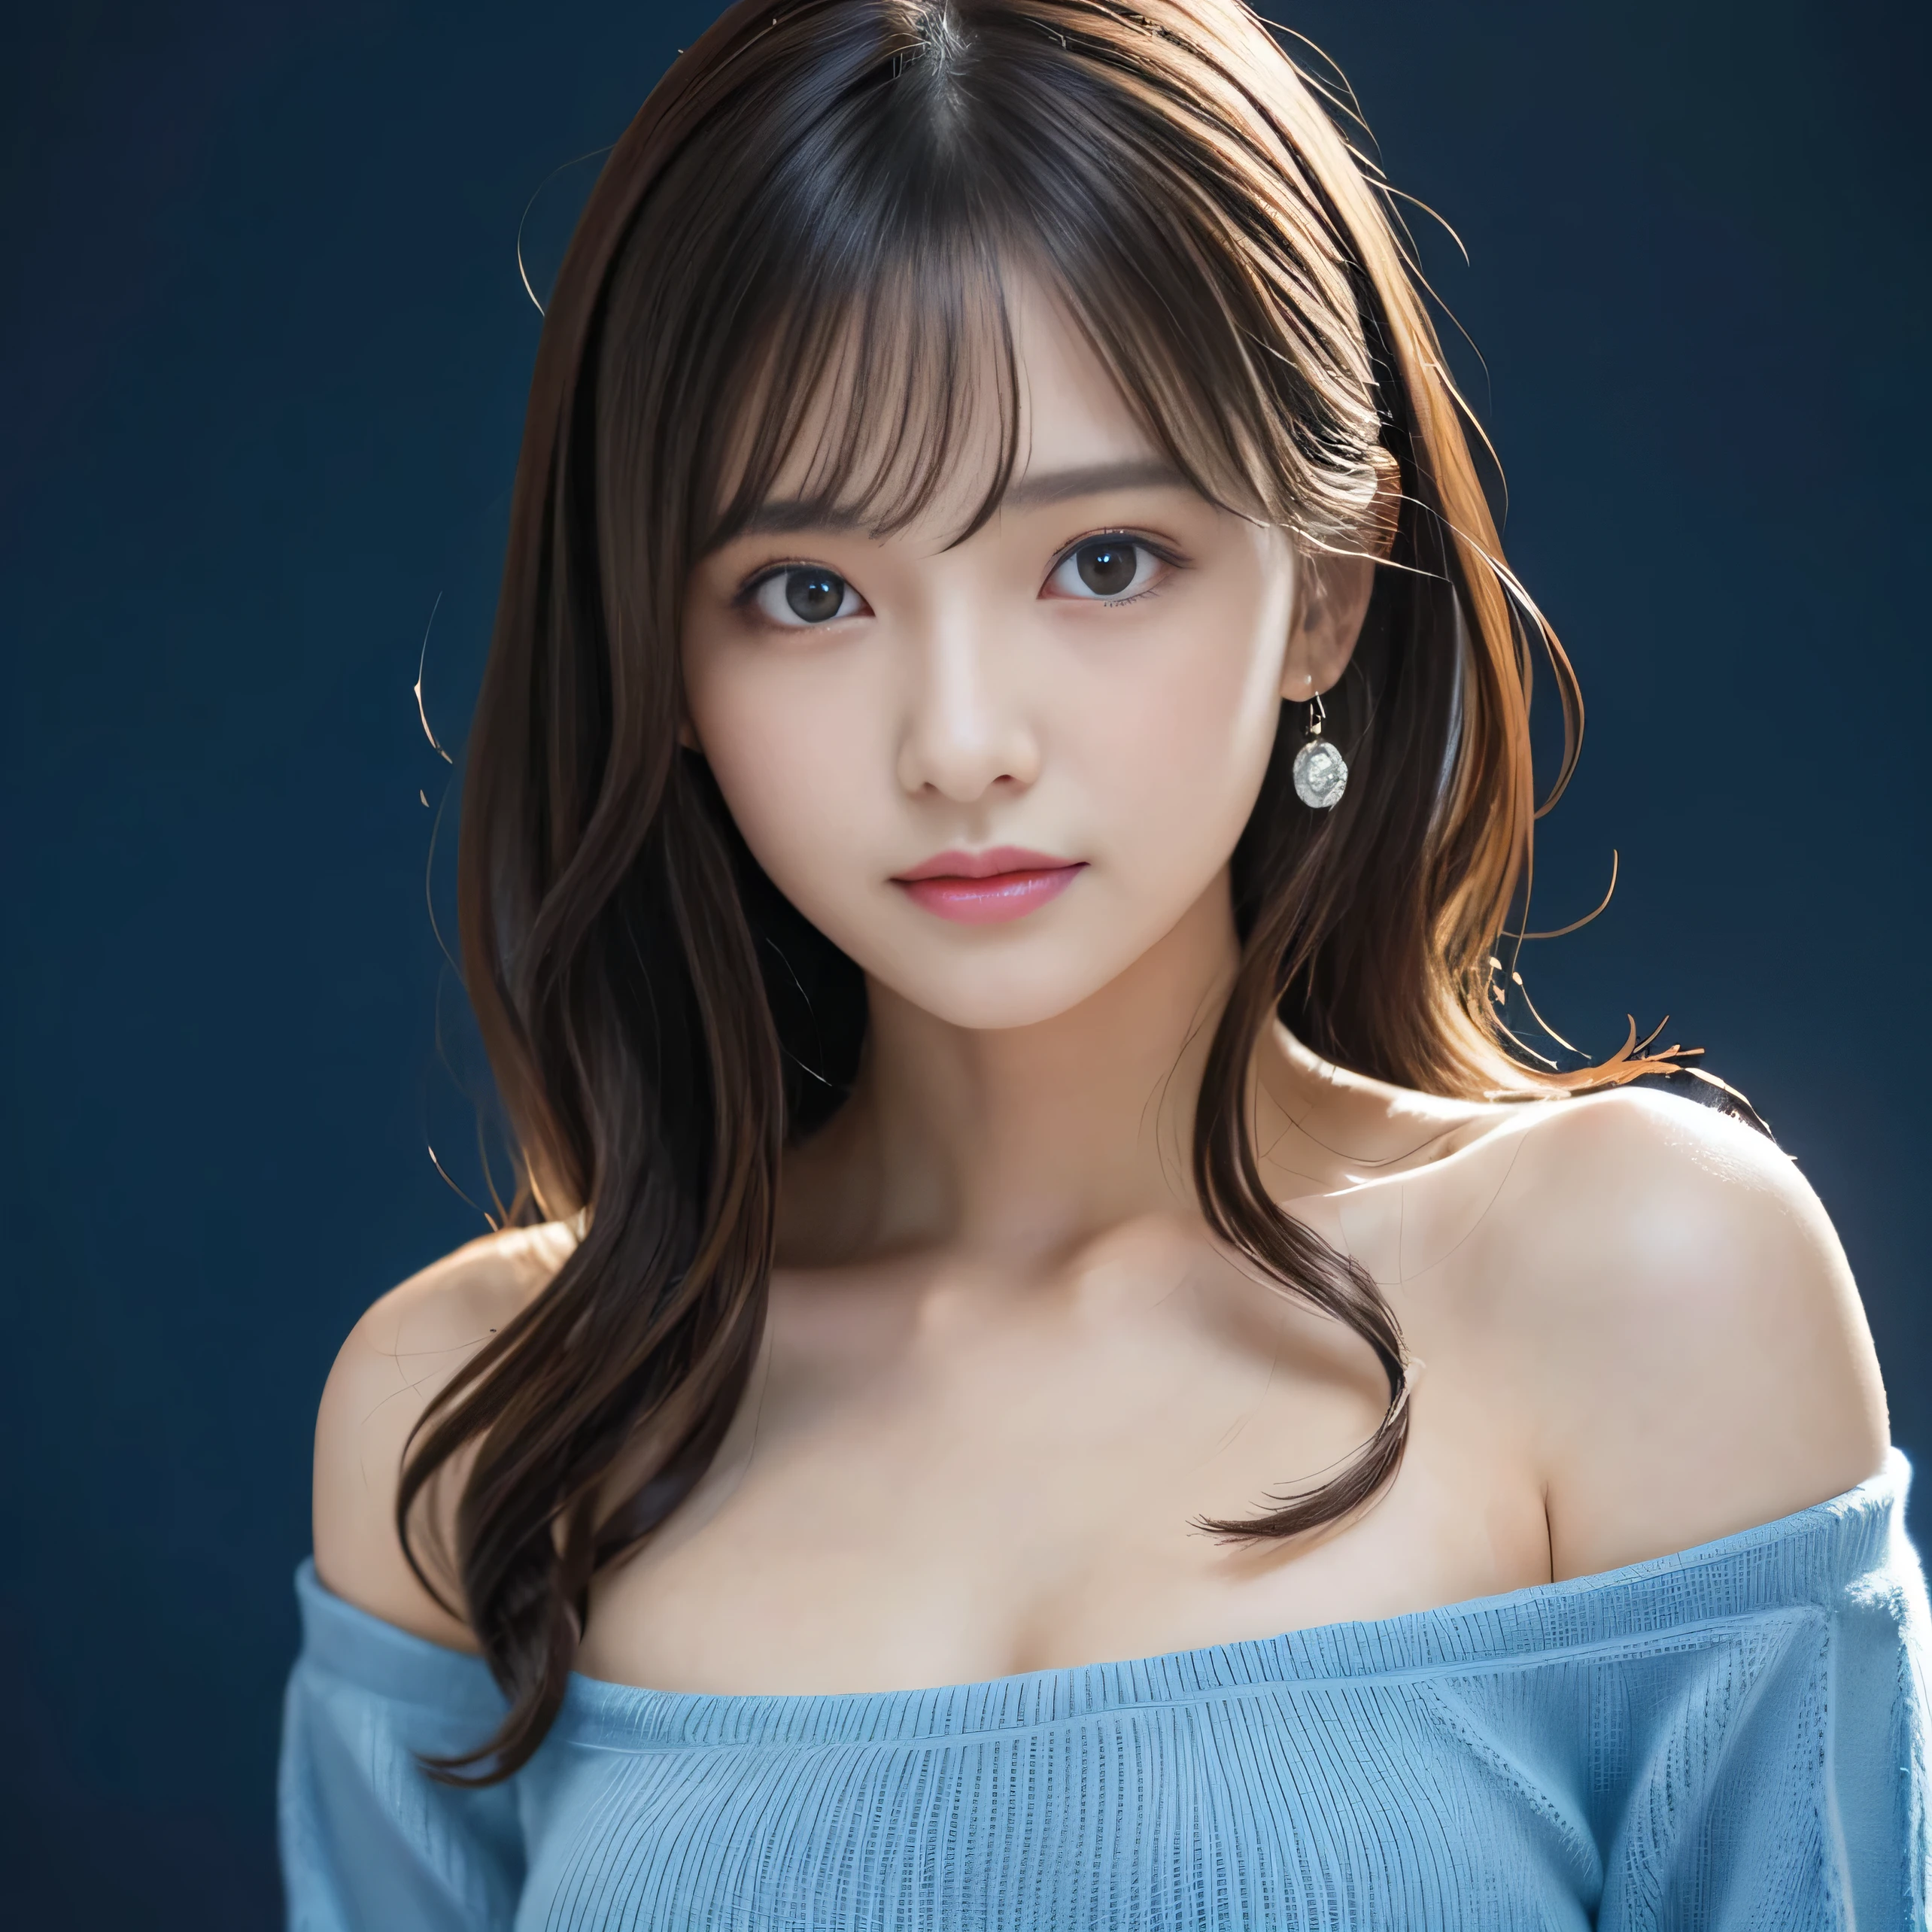 debris flies、highest quality、shape、 Super detailed、small details、 High resolution、8K Dende Wallpaper、Perfect dynamic shape、24 year old beautiful girl、clear、detailed beautiful face、detailed beautiful eyes、rough skin、faint smile、small breasts、knit dress、Neon lights、blue background、dark background、neon